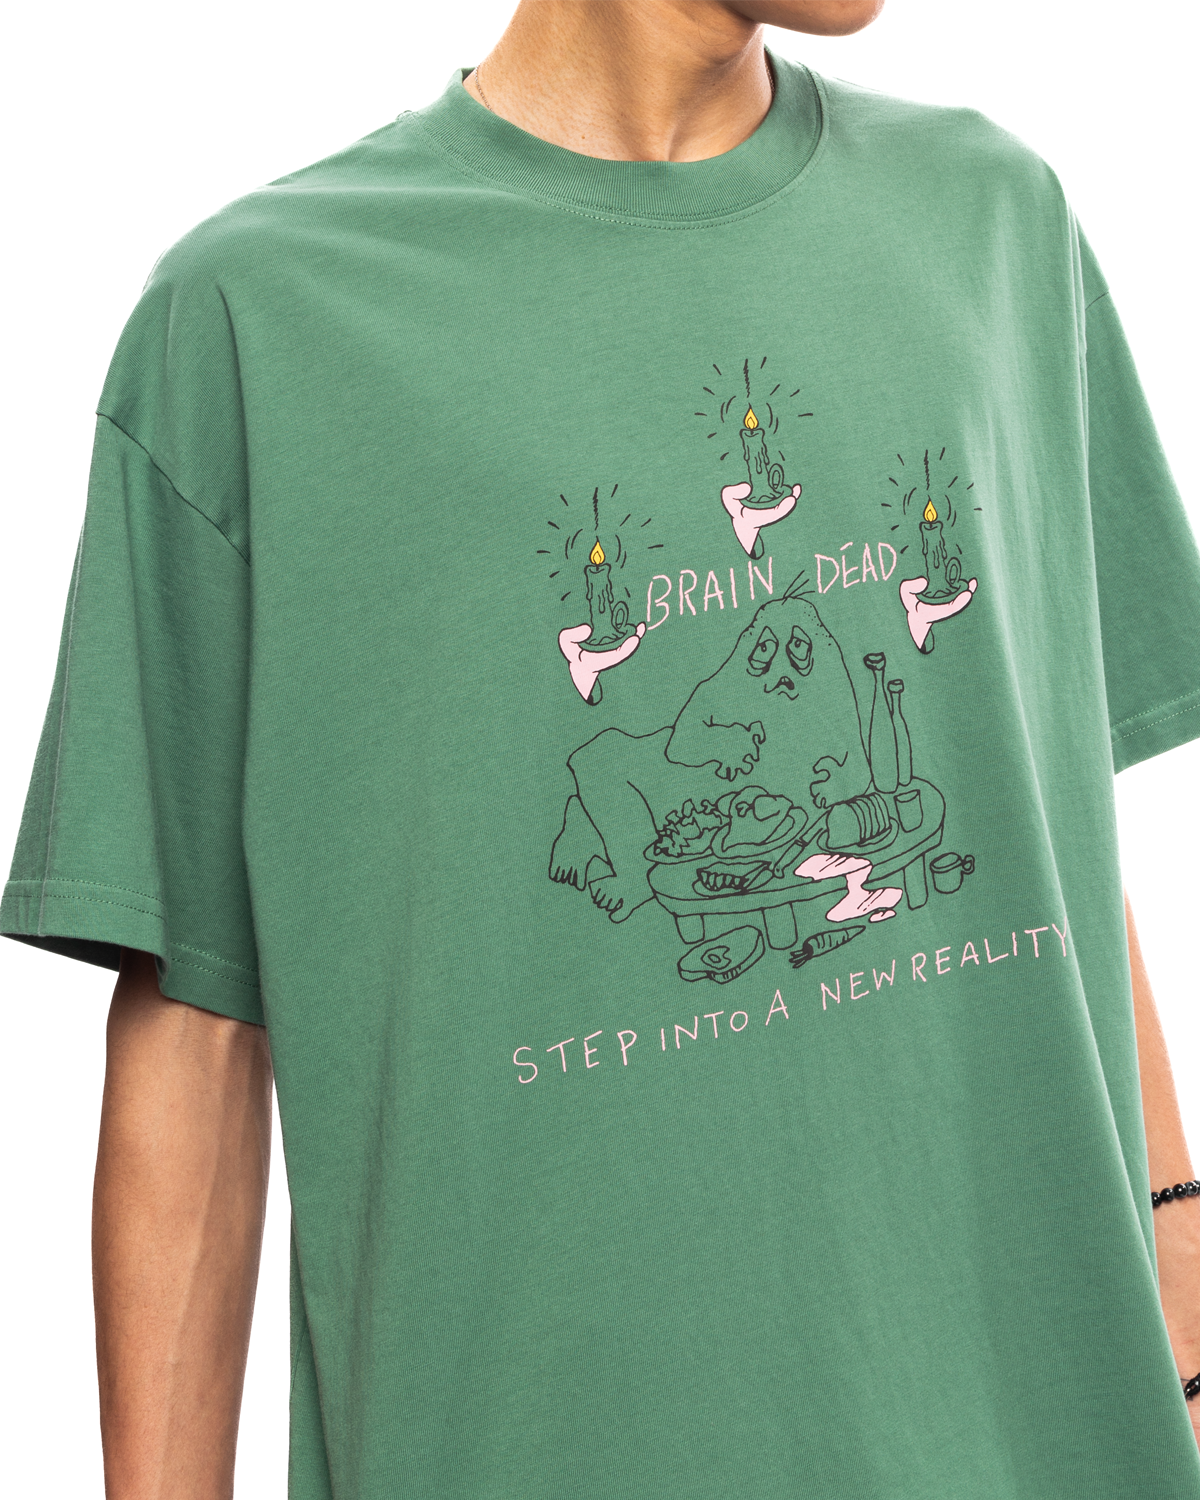 New Reality T-shirt Green